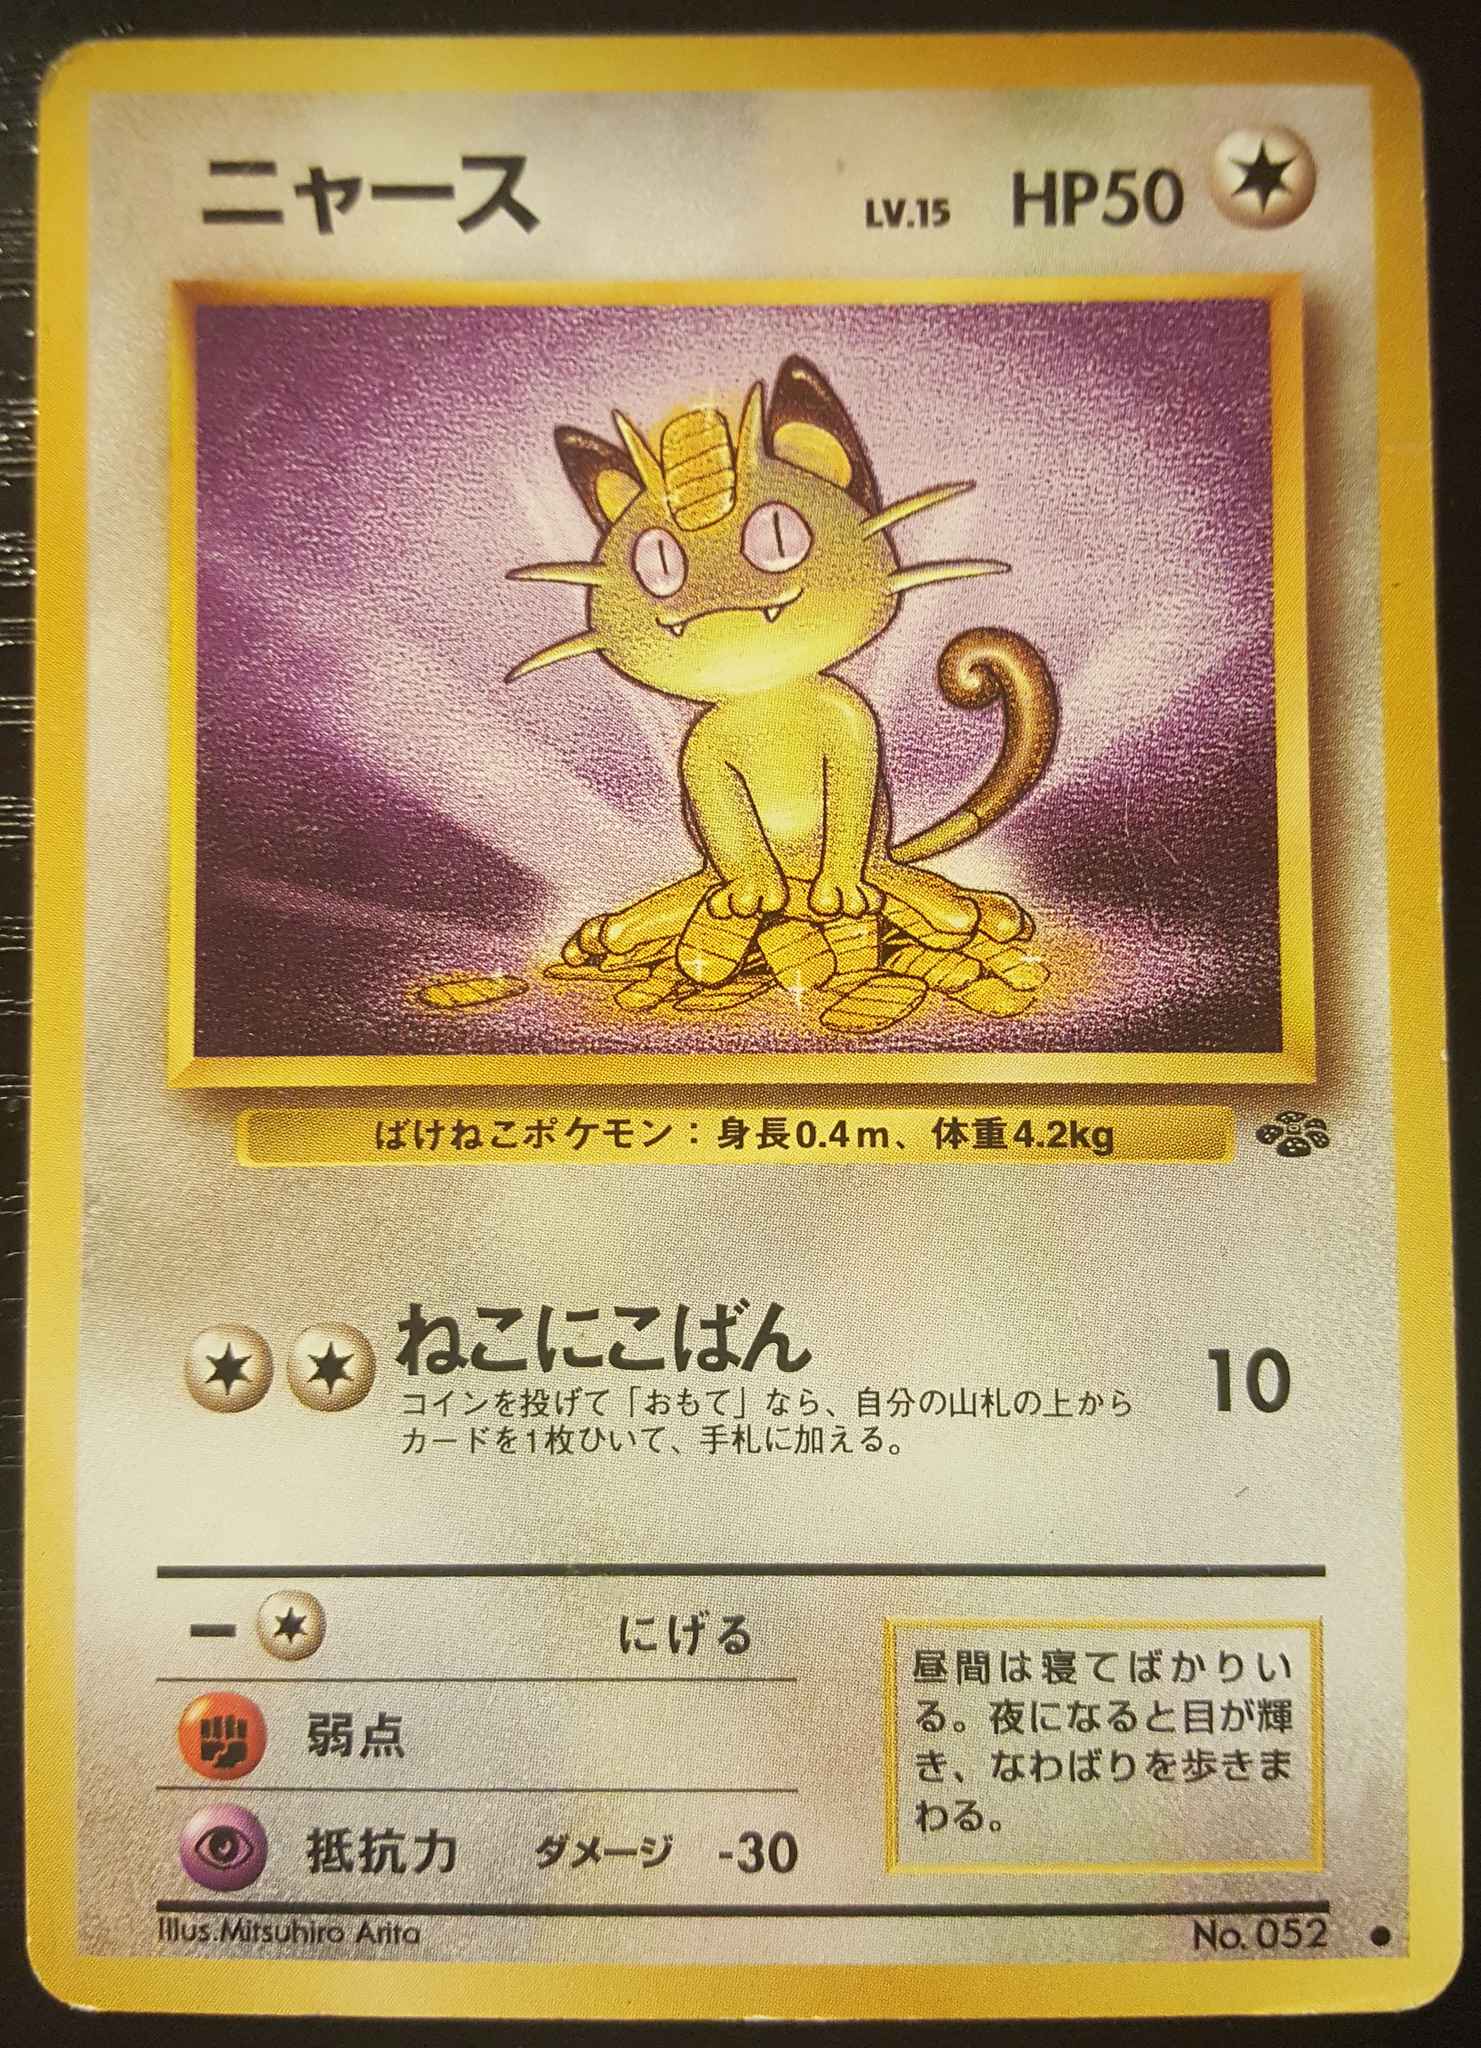 Japanese Meowth Mp Jungle 52 Meowth Jungle Pokemon Online Gaming Store For Cards Miniatures Singles Packs Booster Boxes